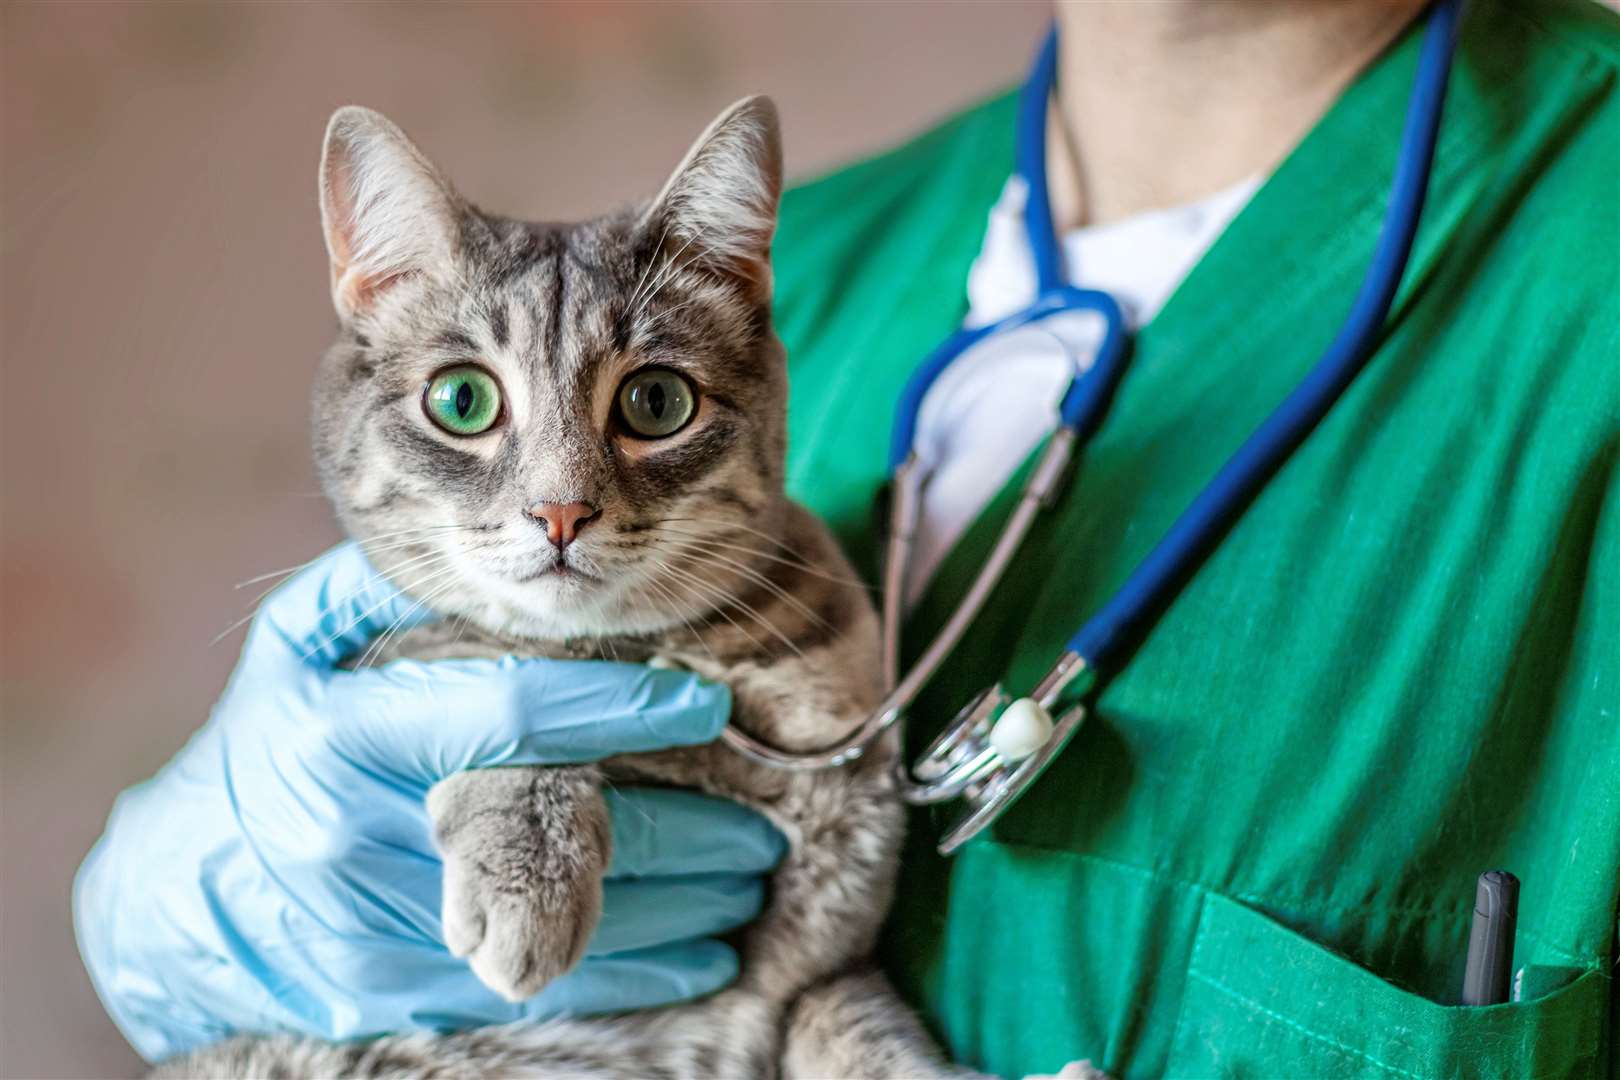 Veterinary services in the UK are to be reviewed. Image: iStock.